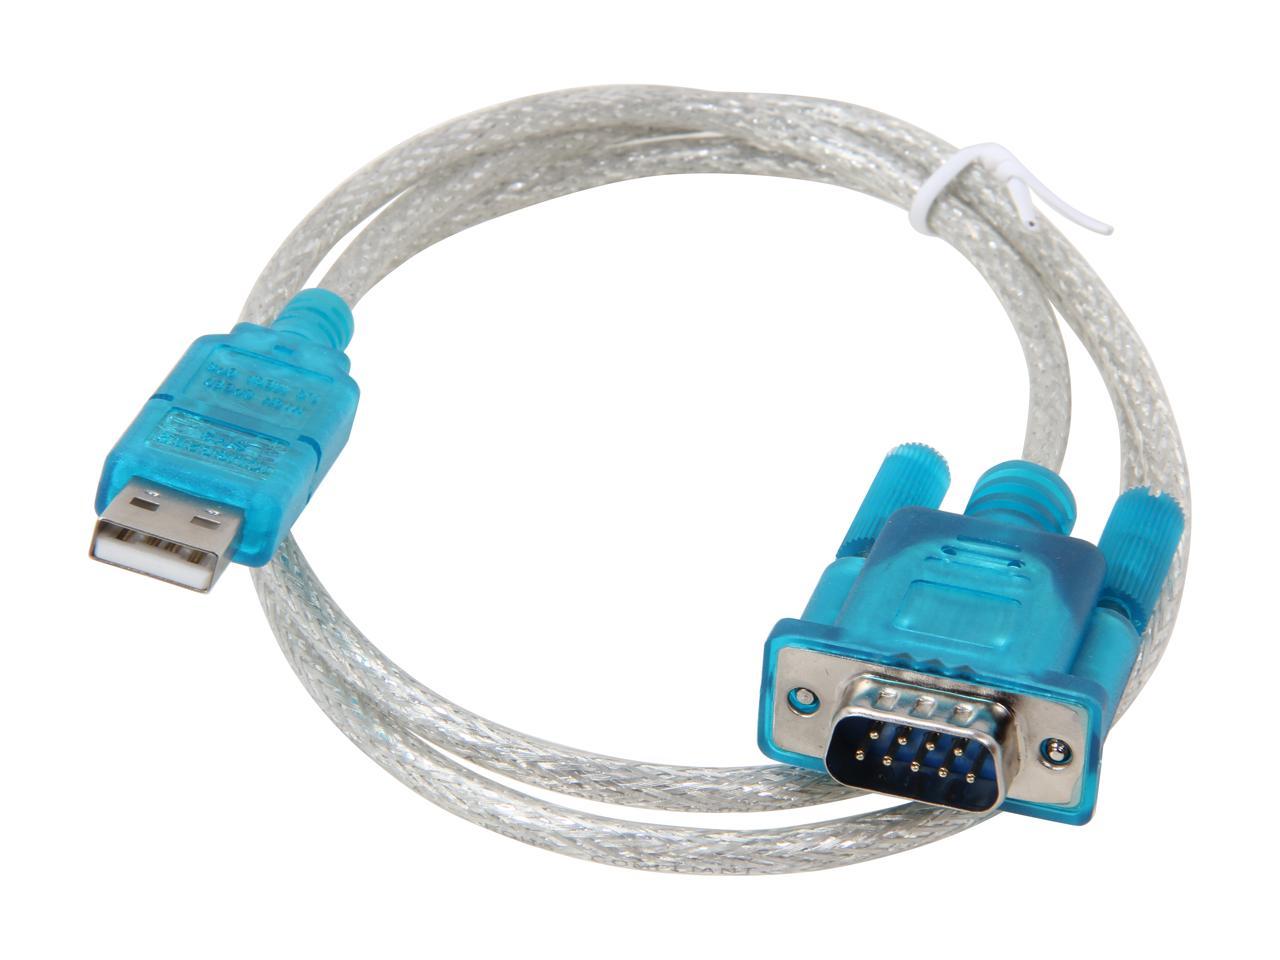 prolific usb to serial comm port version 3.2.0.0